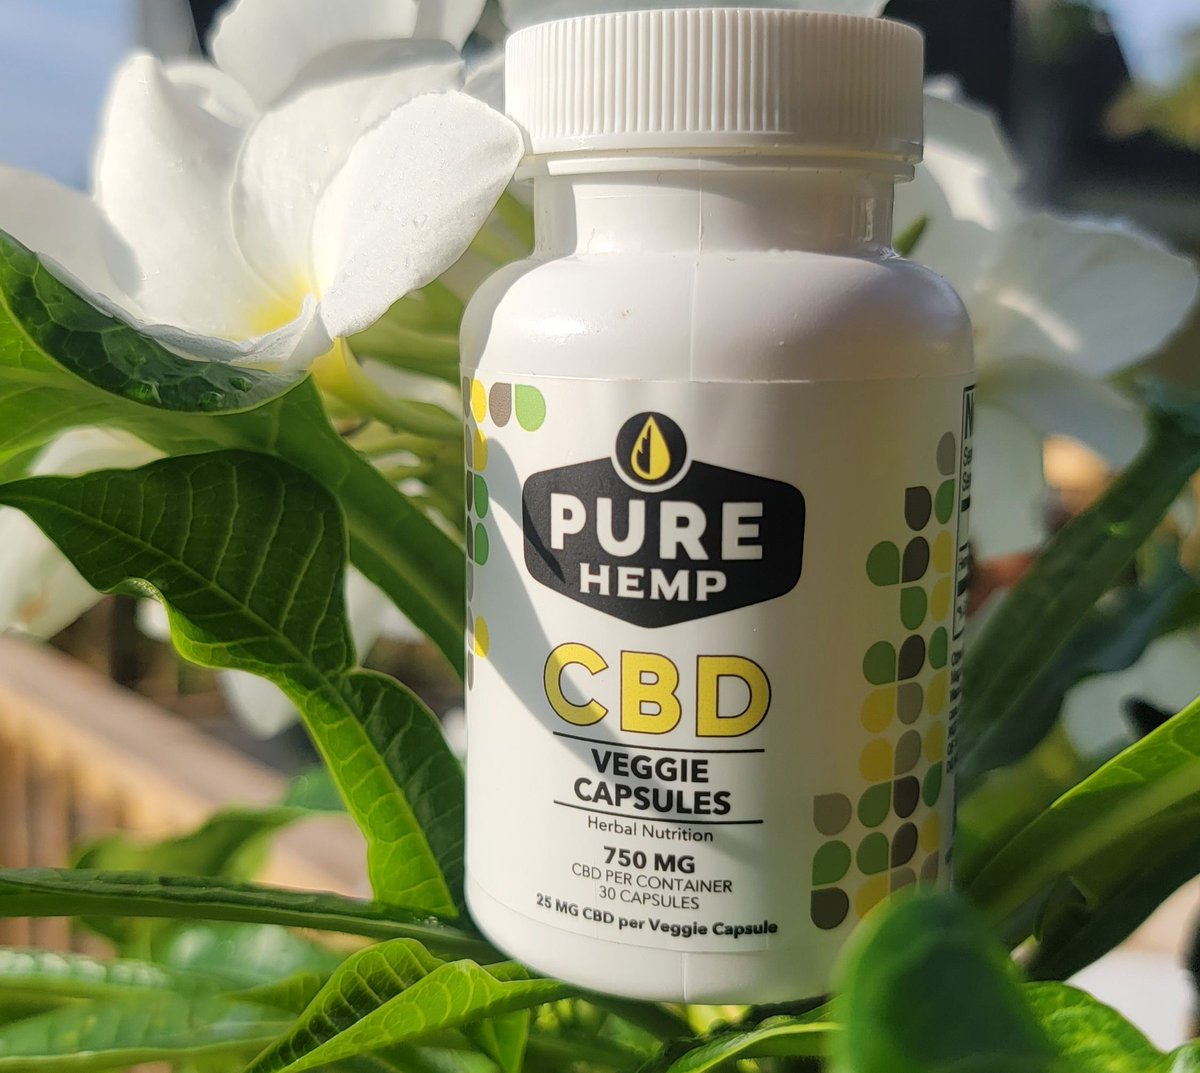 Give your wellness a boost this spring. Check out the Pure Hemp Shop today!! purehempshop.com #PureHempShop #PureHemp #d9 #cbd #d8 #wellness #enjoylife #purebliss #relax #relief #stressrelief #painrelief #chronicpain